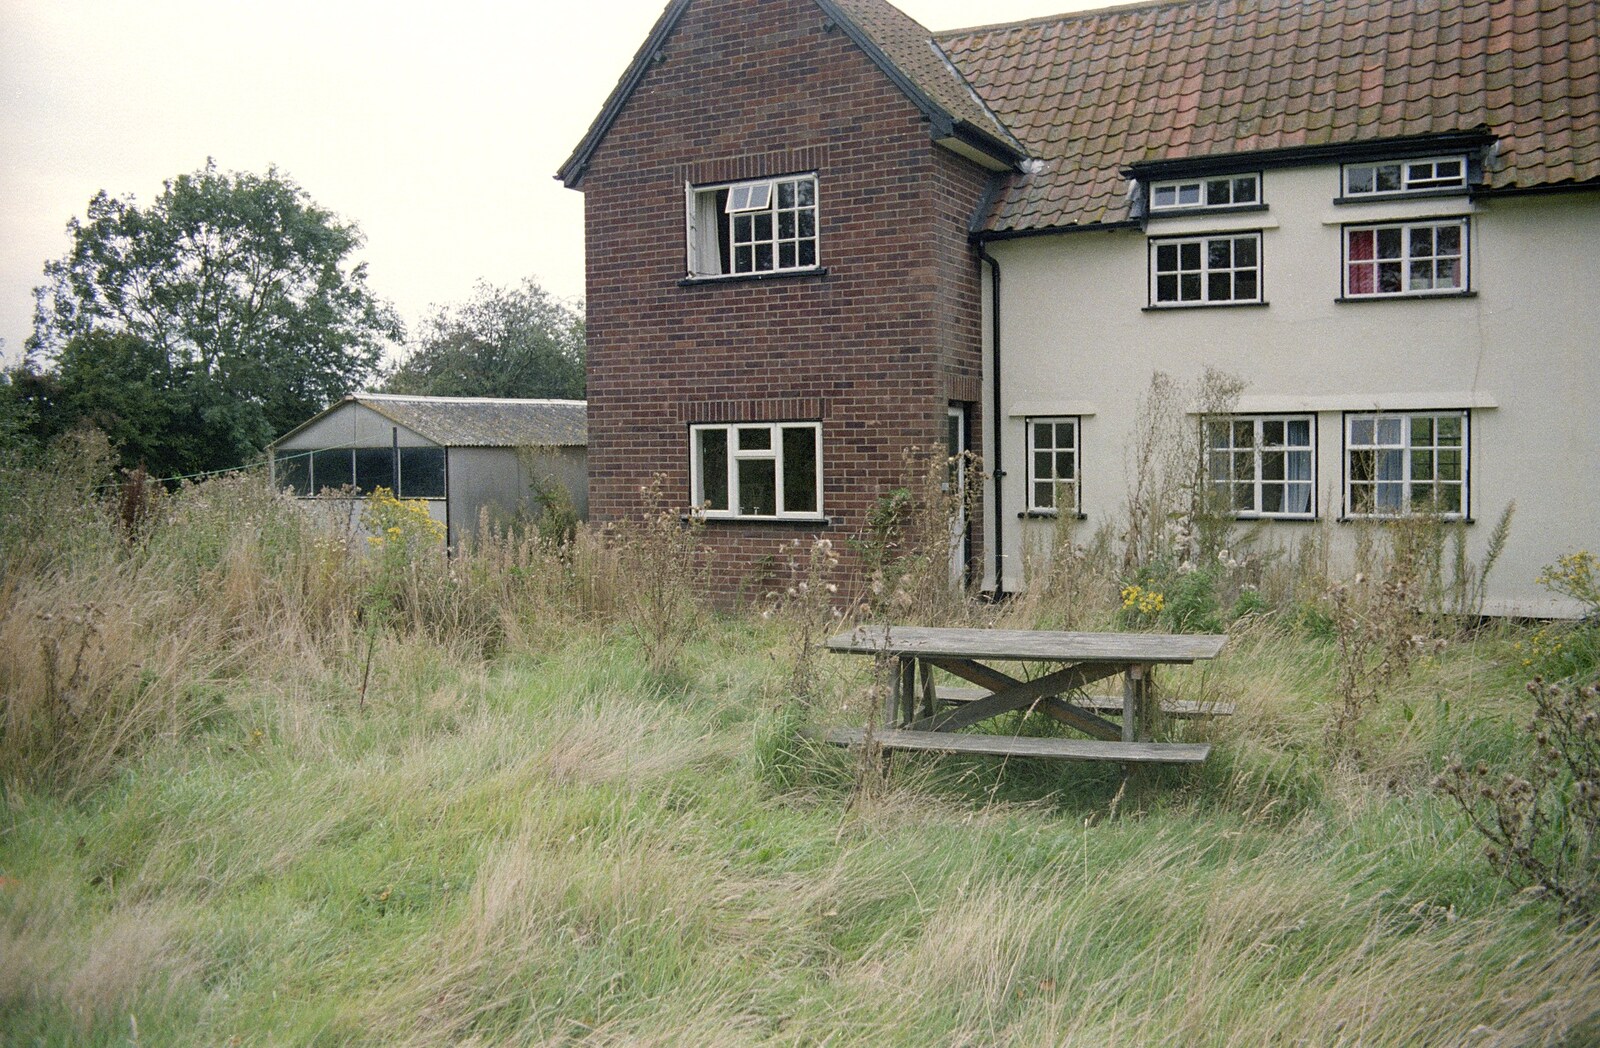 Another view of the back of the house from Moving In, Brome, Suffolk - 10th April 1994